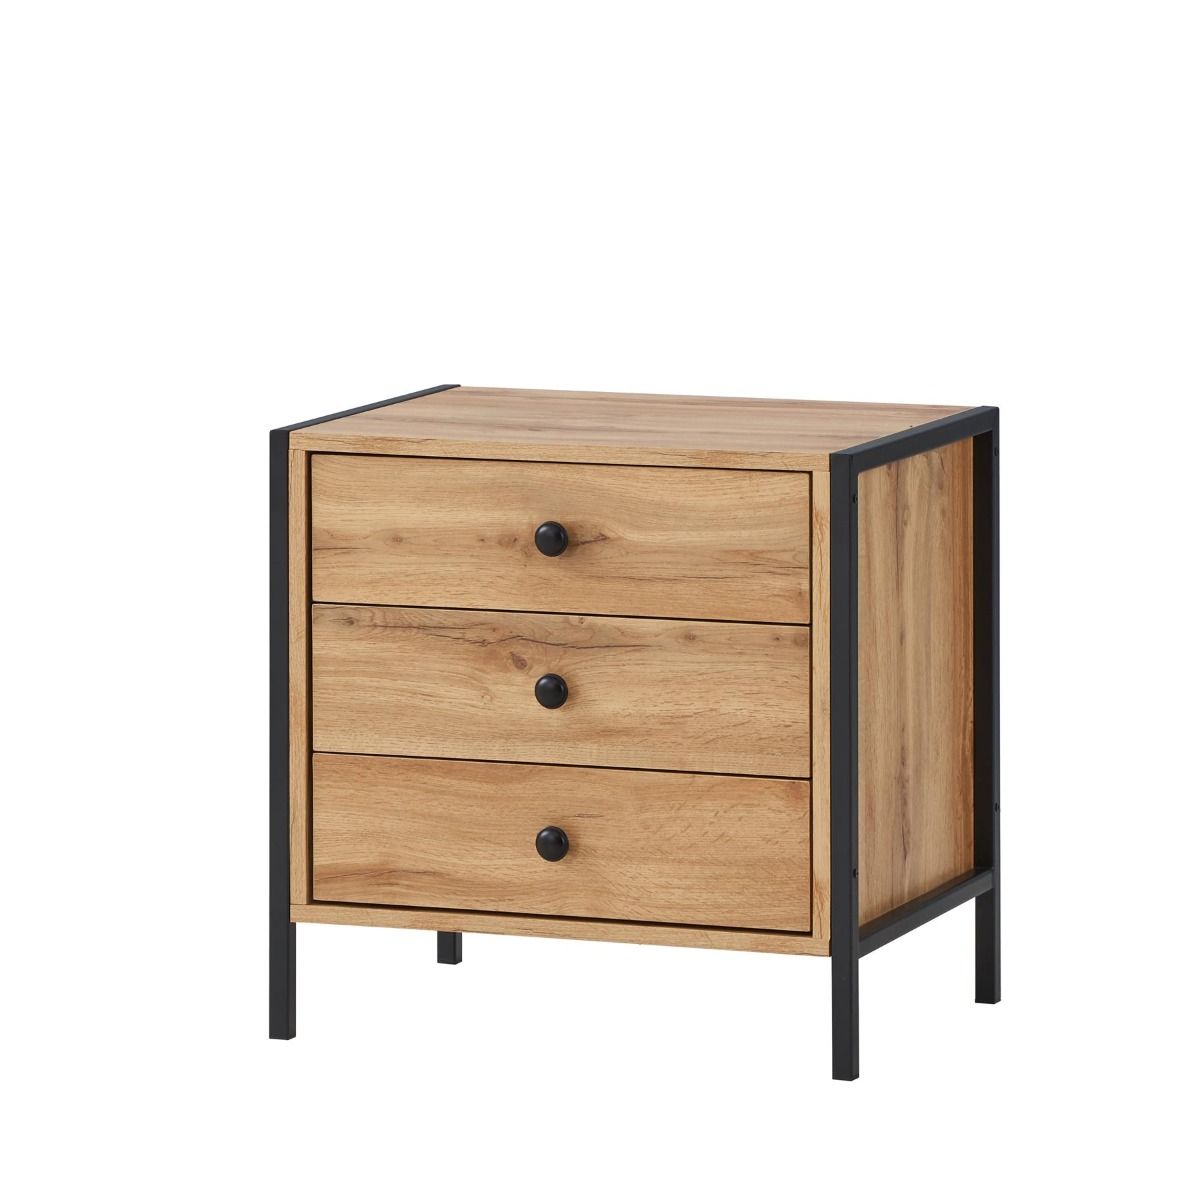 Woburn Bedside Table with 3 Drawers